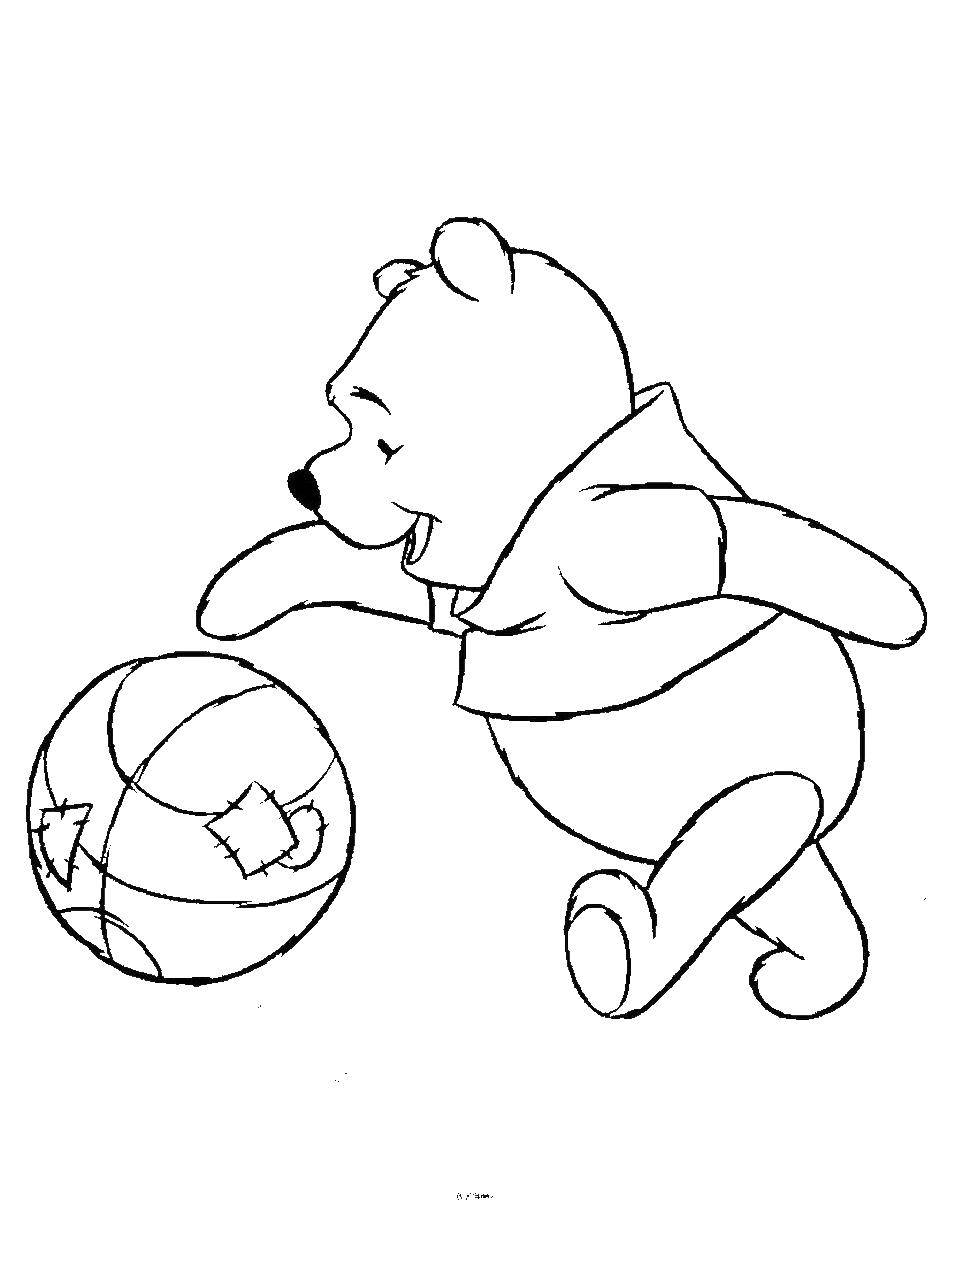 Coloring Winnie the Pooh ball. Category cartoons. Tags:  Cartoon character, Winnie the Pooh.